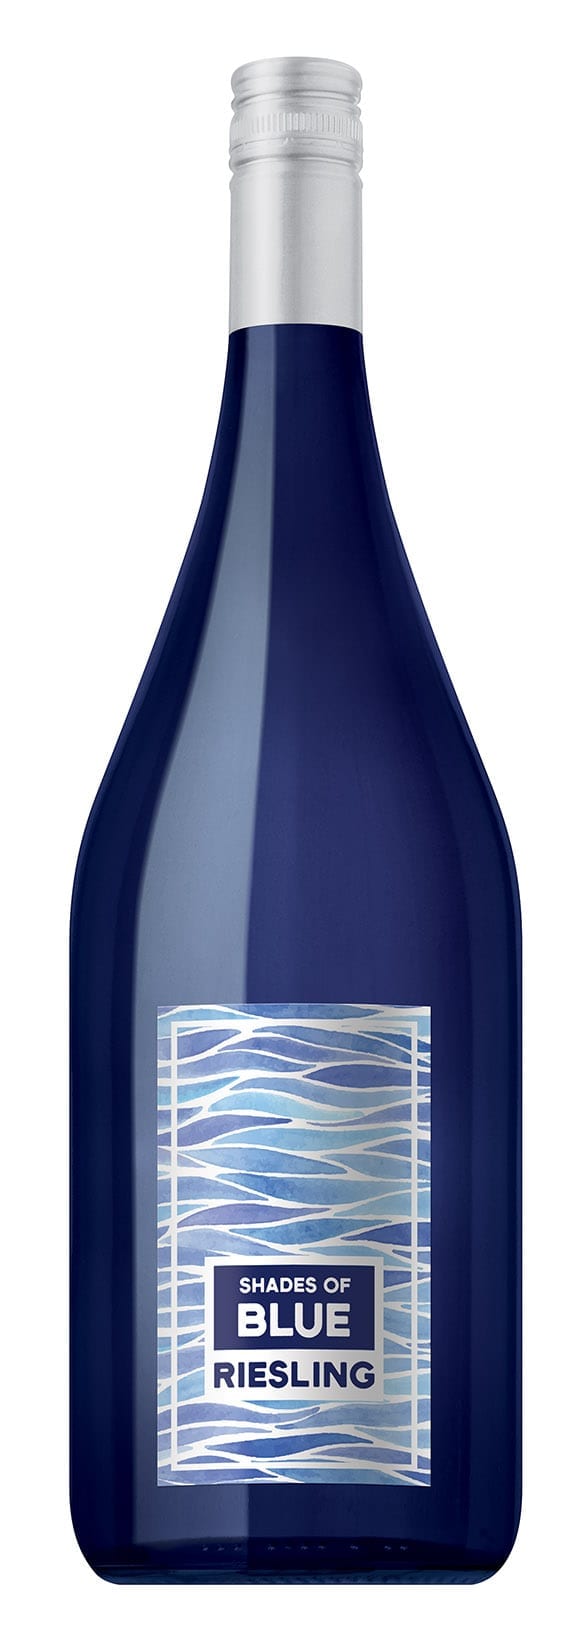 Shades of Blue, wine bottle, riesling